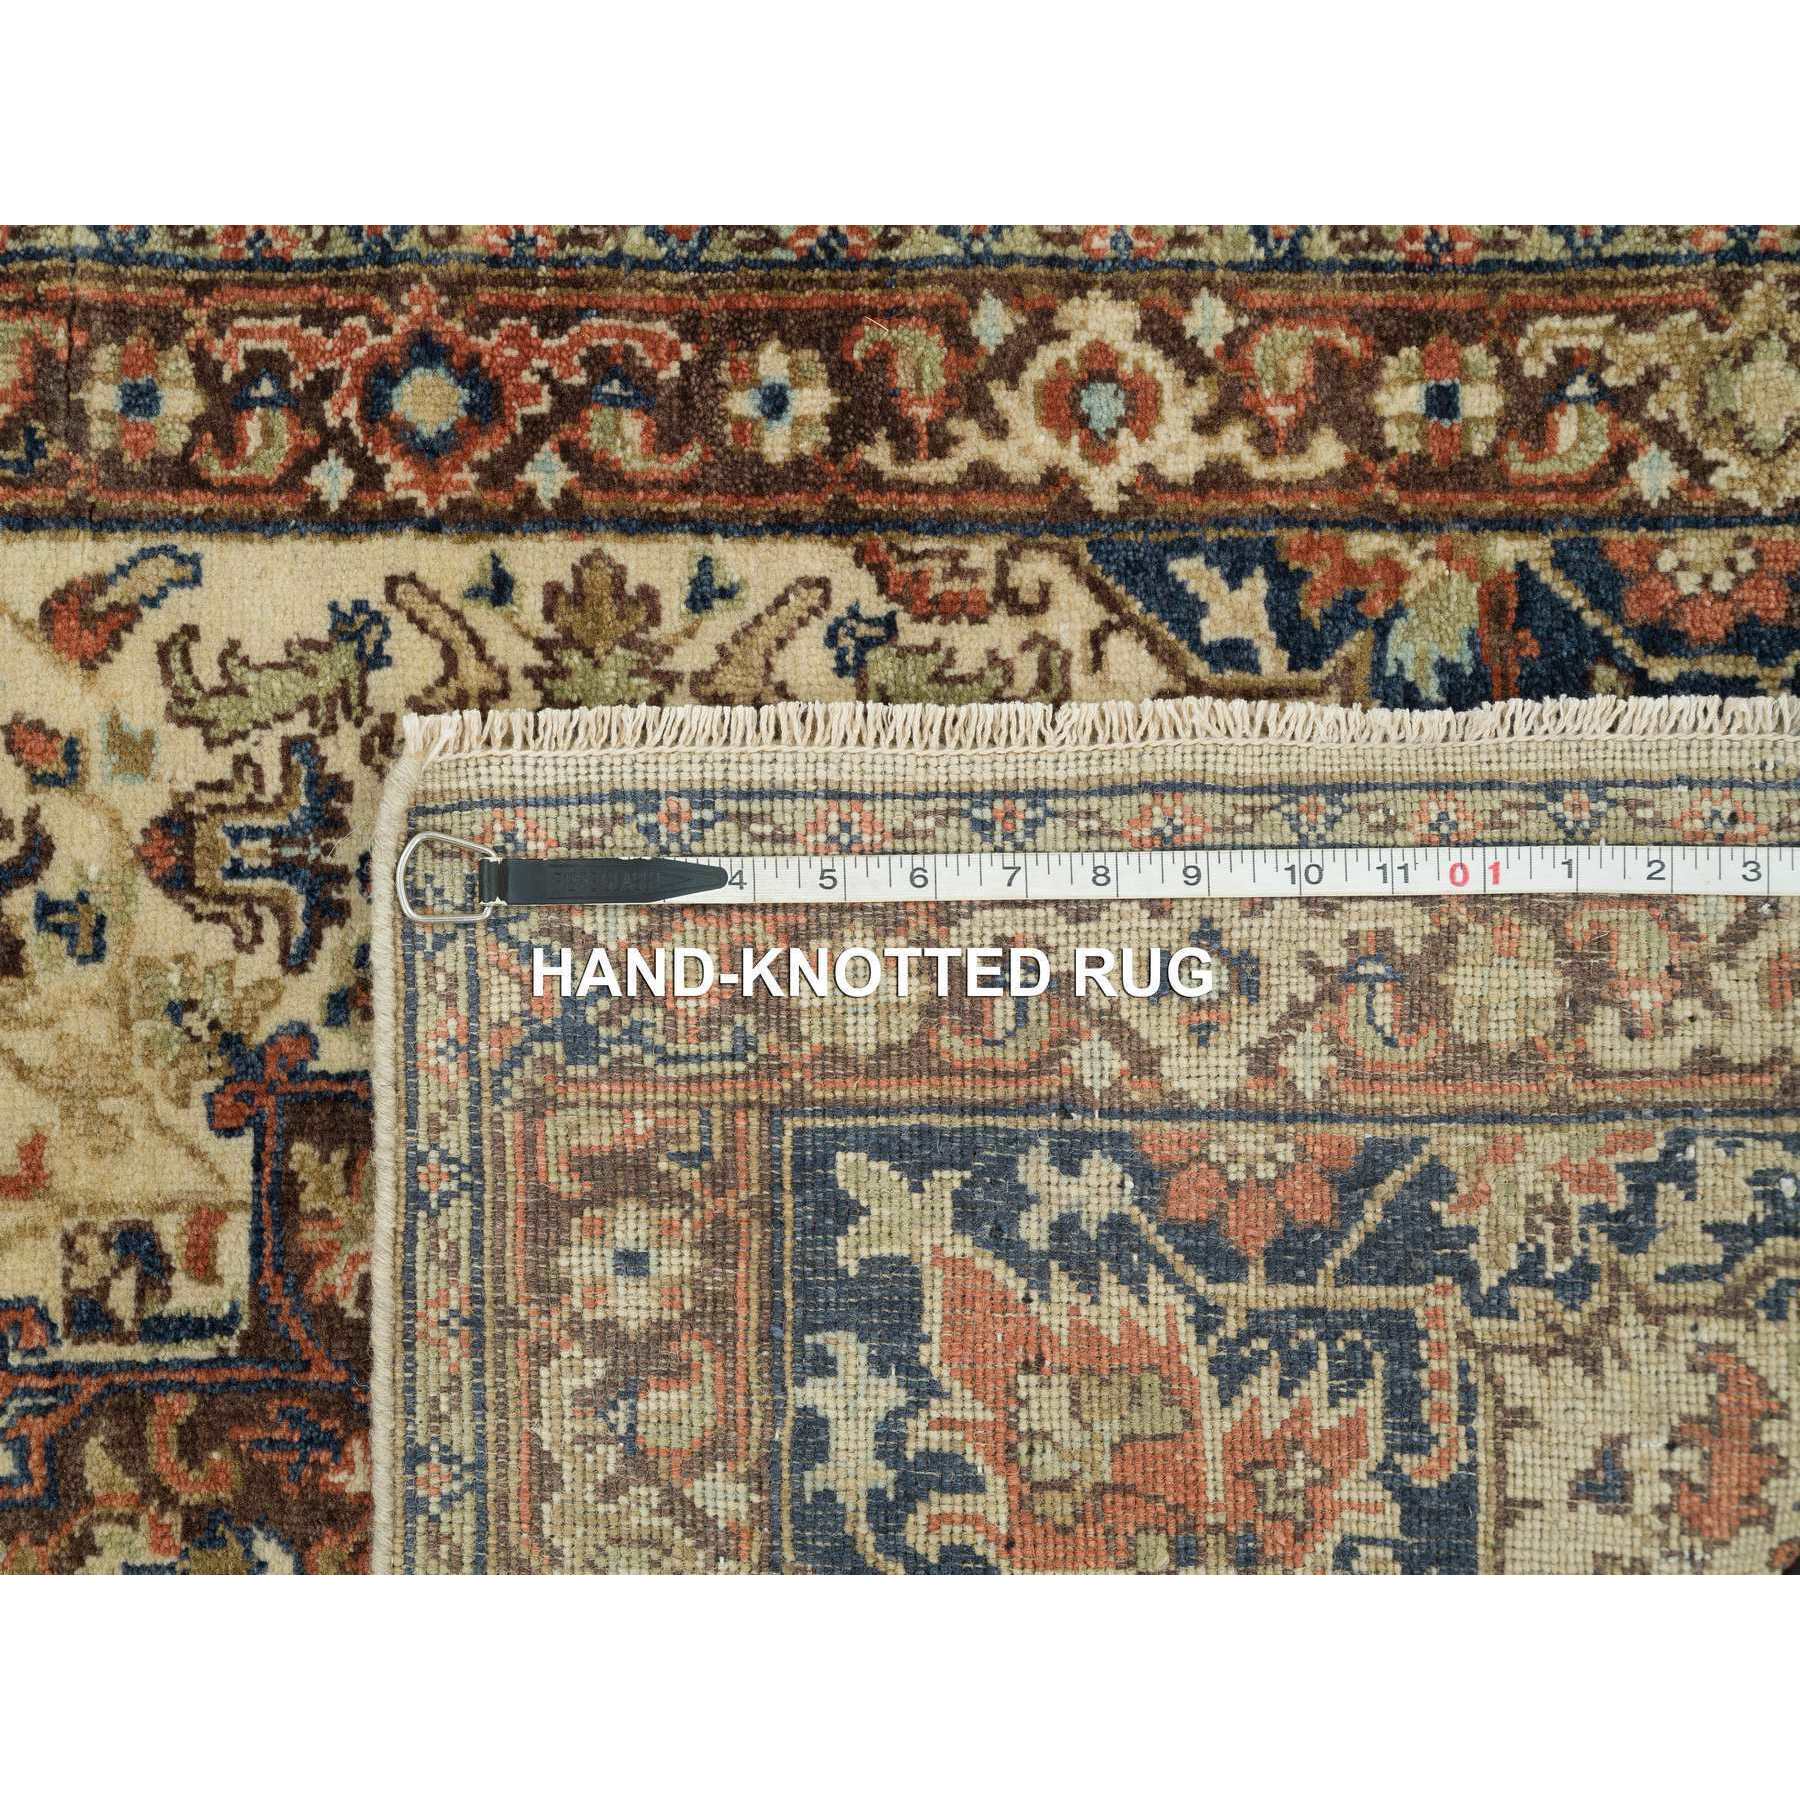 2'7"x10'3" Beige, Antiqued Heriz Re-Creation with Geometric Medallions, Extra Soft Wool, Hand Woven, Runner Oriental Rug 